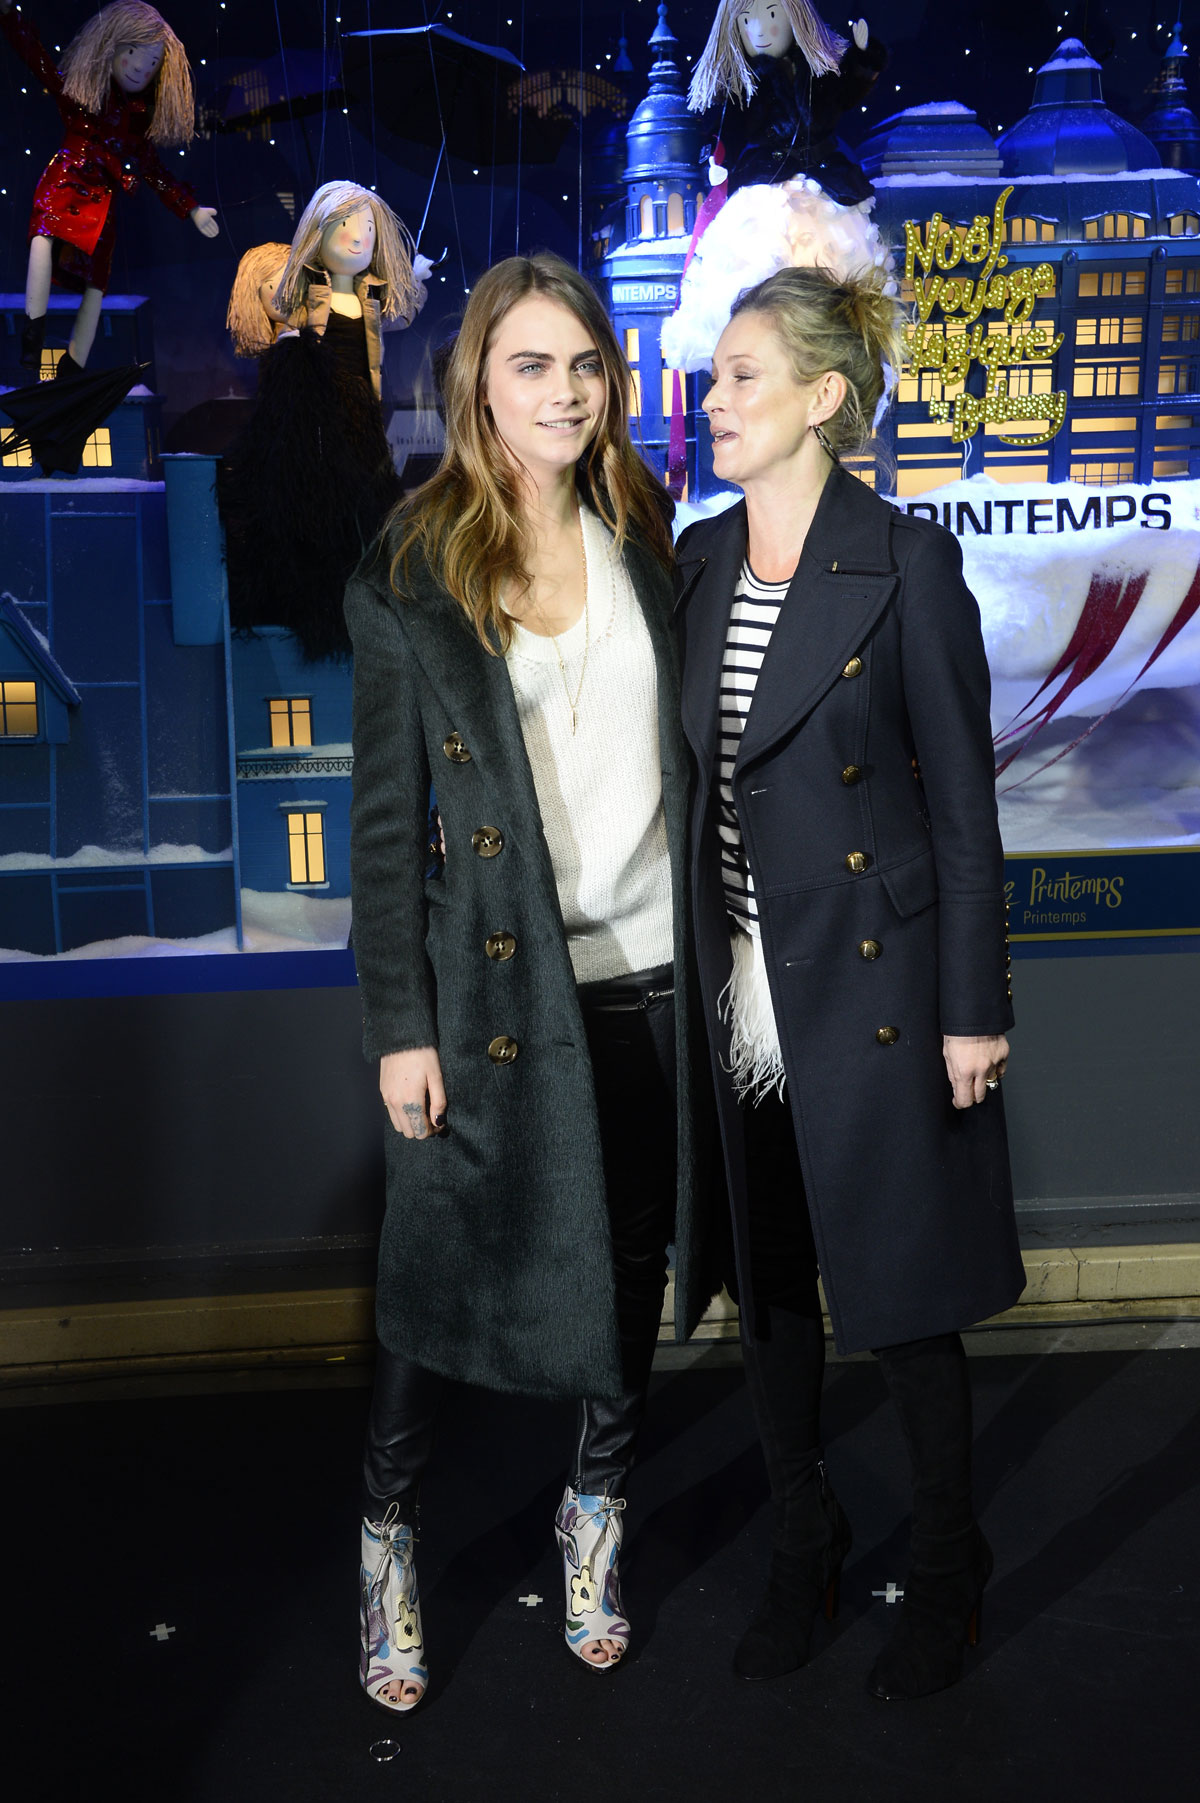 Cara Delevingne and Kate Moss attend the Printemps Christmas Decorations Inauguration